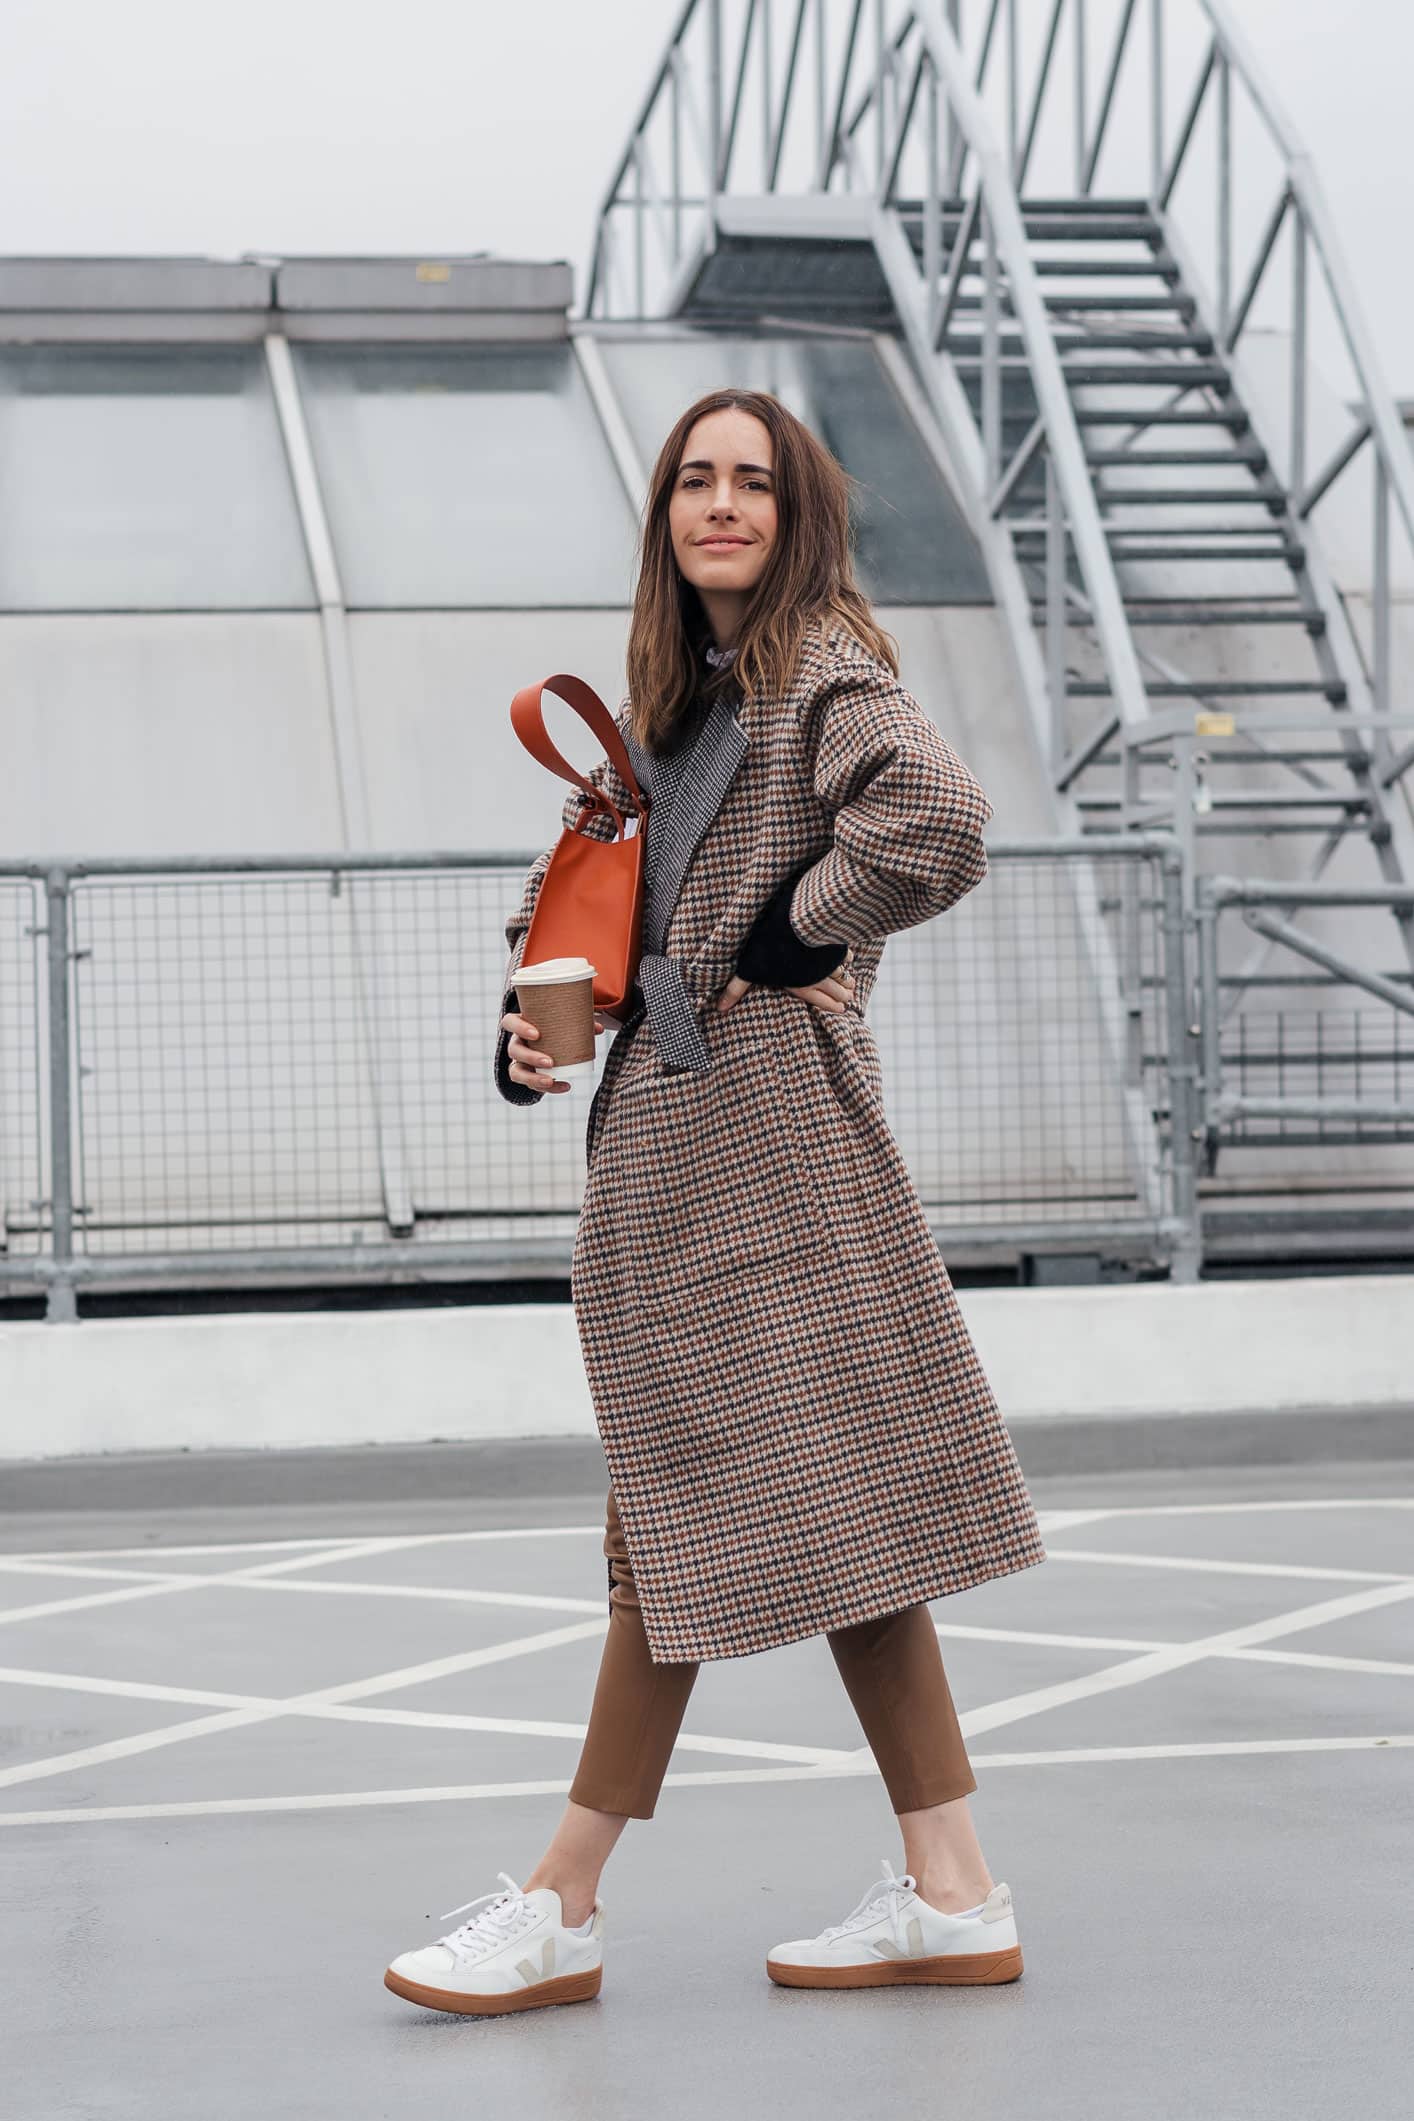 Louise Roe of Front Roe picks her top Spring coats and jackets